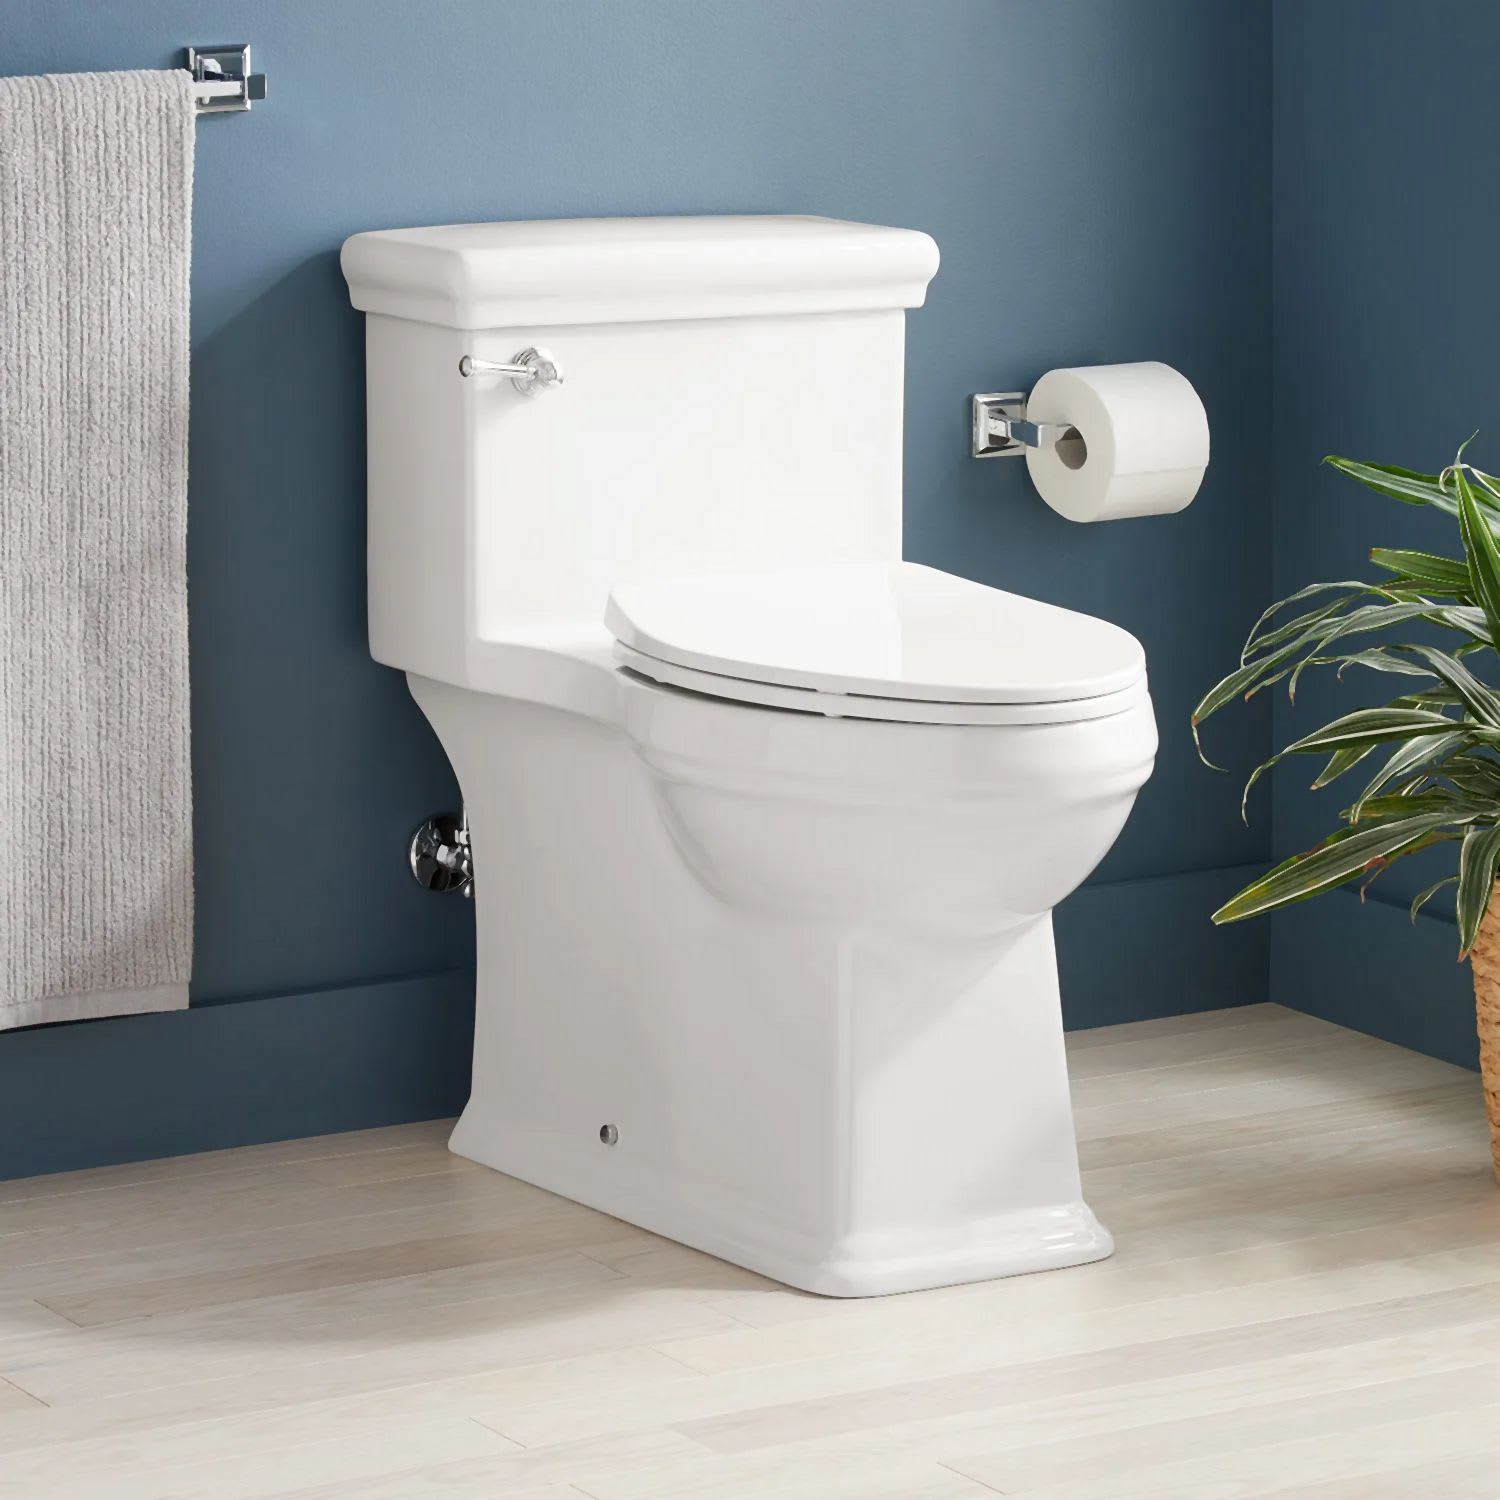 Signature Hardware 447351 Biscuit Key West 1.28 GPF One Piece Elongated  Skirted Chair Height Toilet Seat Included